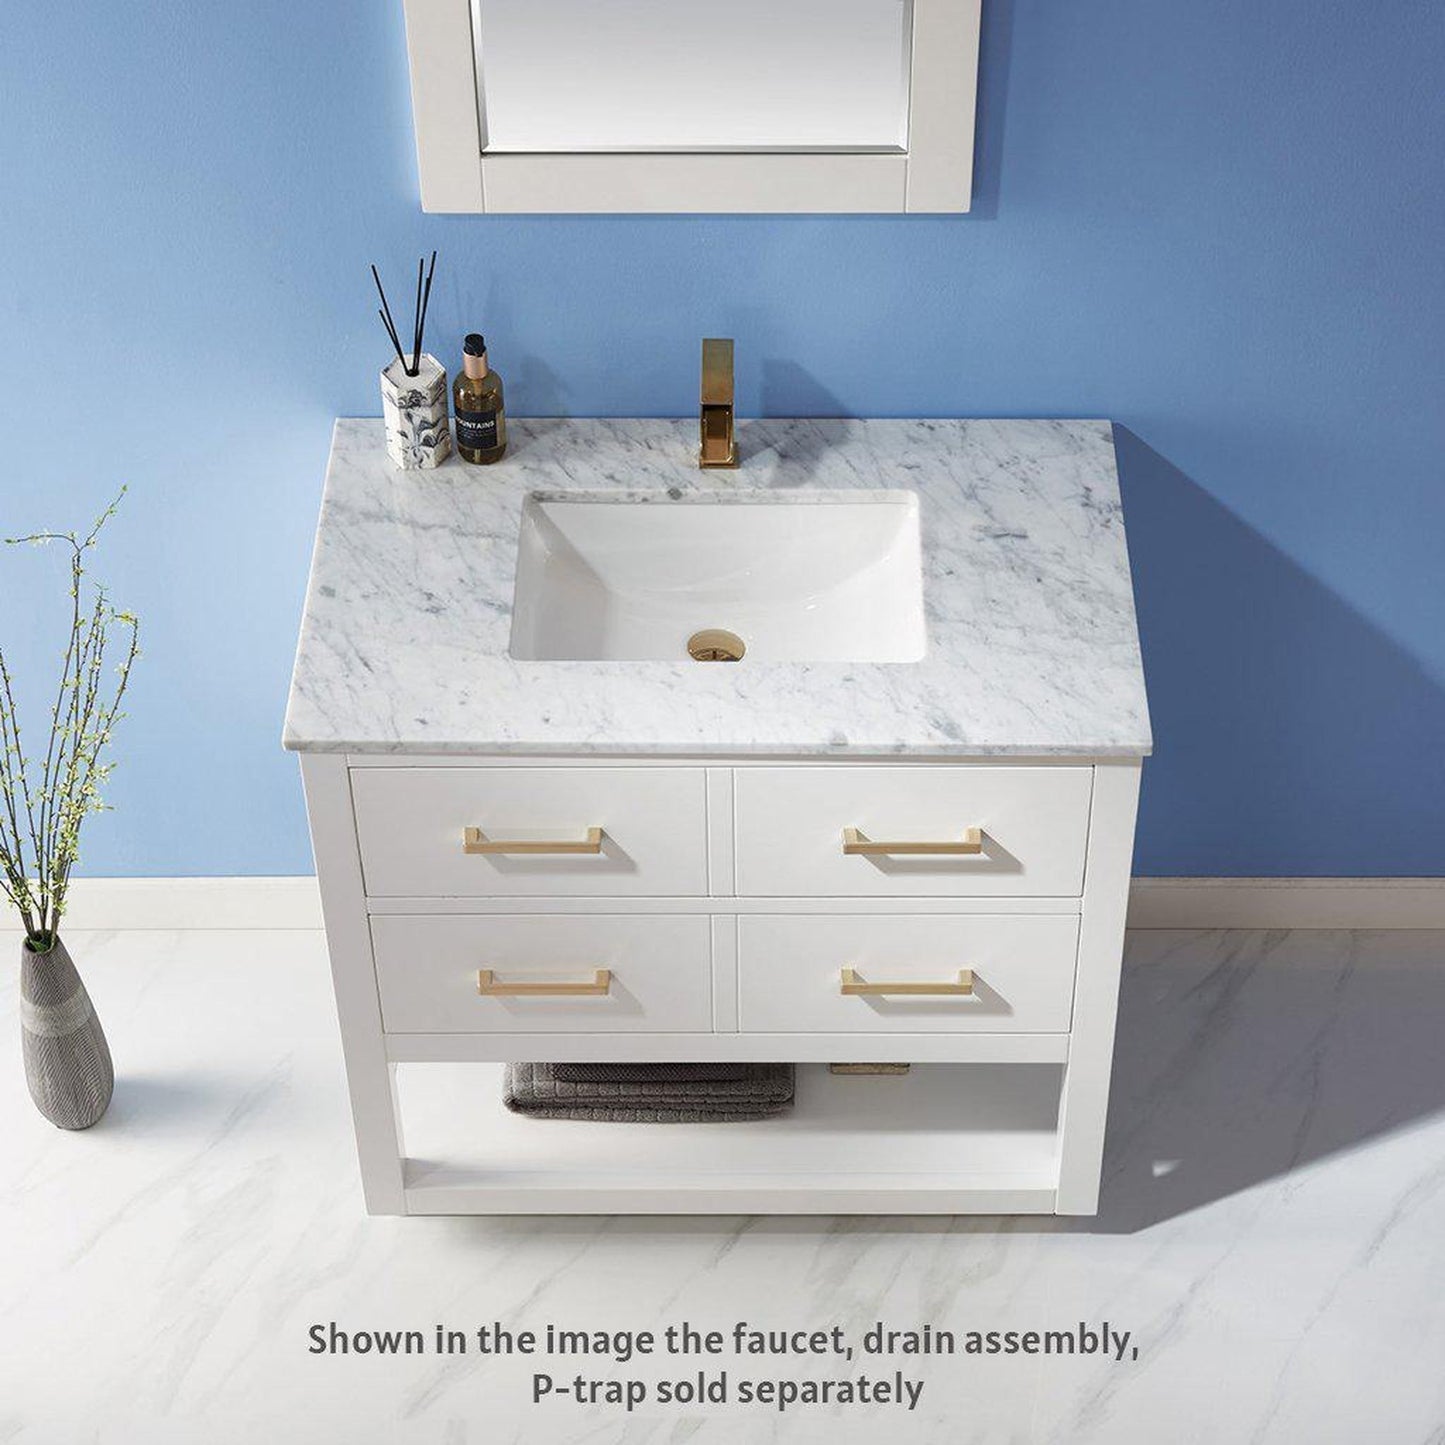 Altair Remi 36" Single White Freestanding Bathroom Vanity Set With Mirror, Natural Carrara White Marble Top, Rectangular Undermount Ceramic Sink, and Overflow